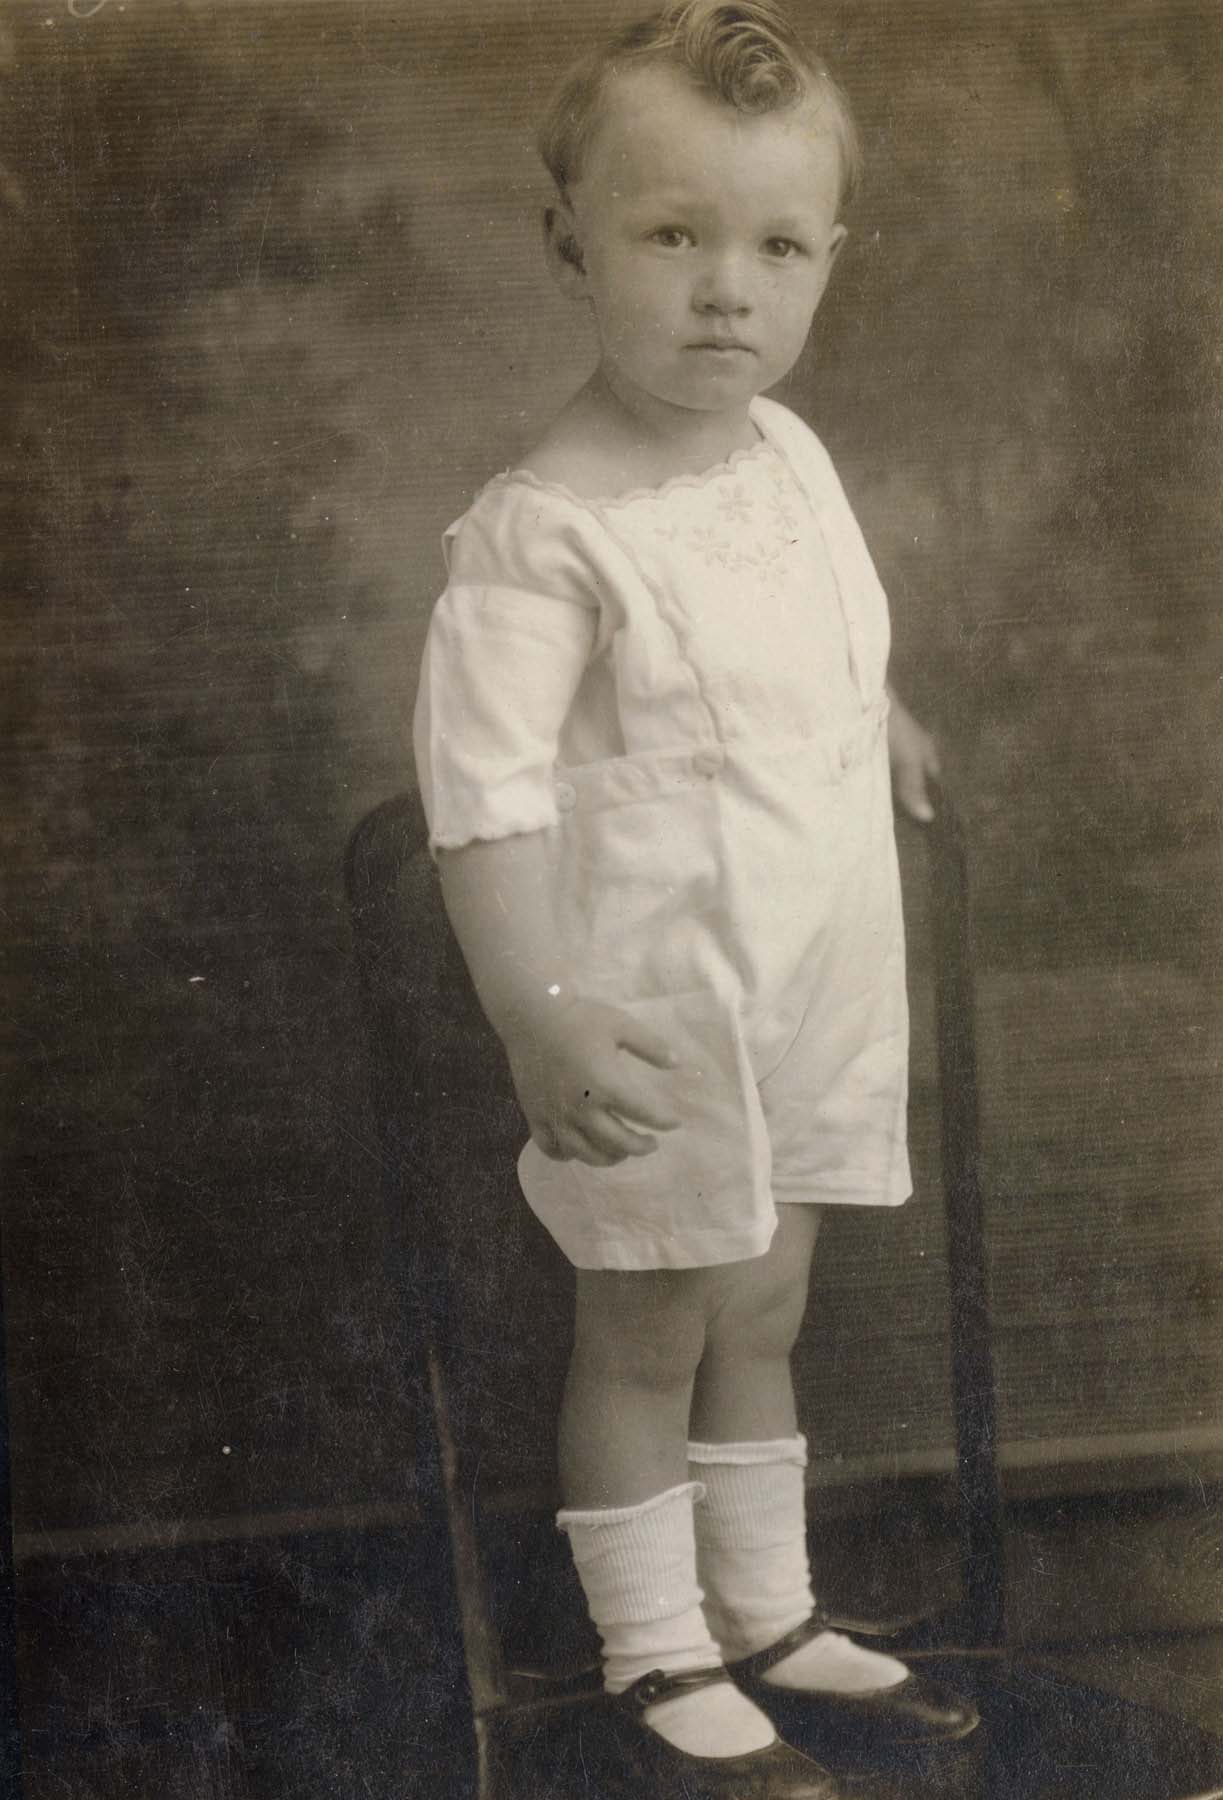 Formal black-and-white photo of a child standing on a chair.